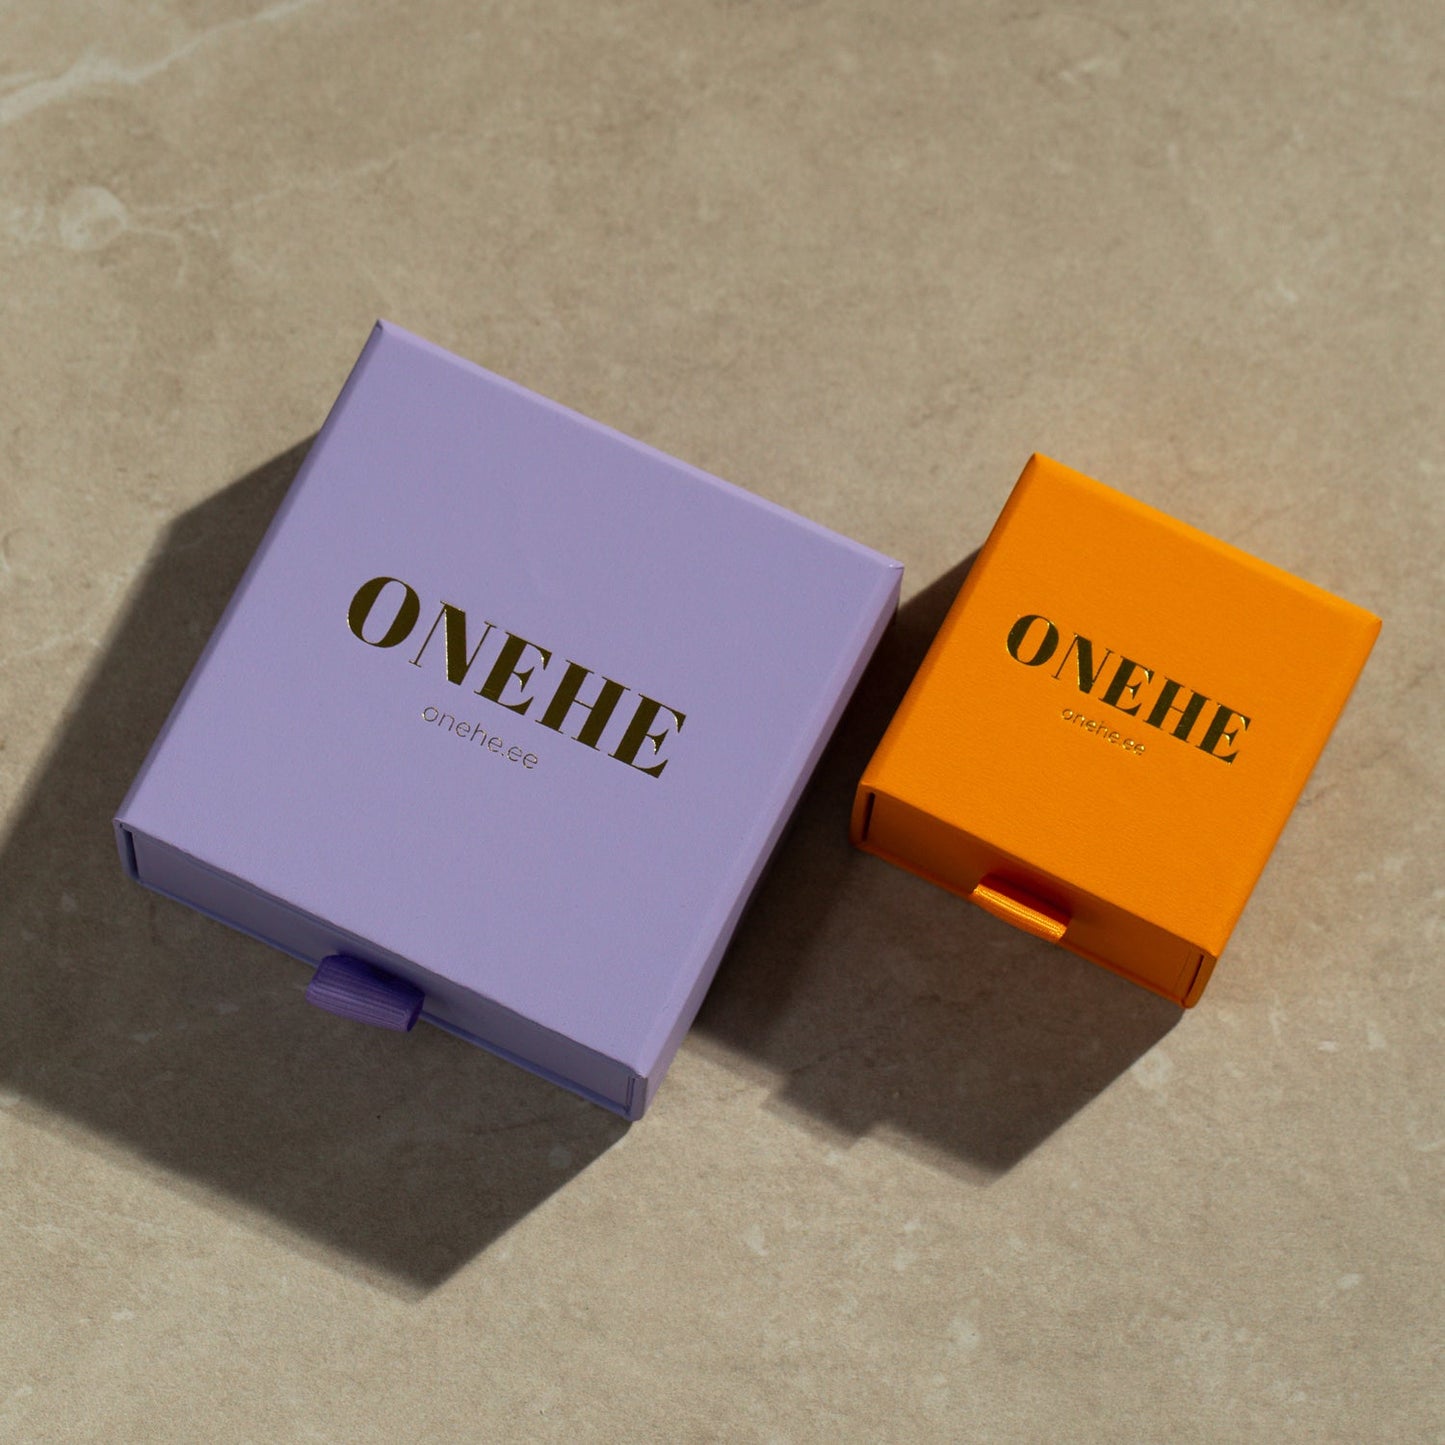 Minimalistic circle-shaped Echo silver stud earrings on marble surface, purple box with gold text, orange box with gold text, and logo close-ups.